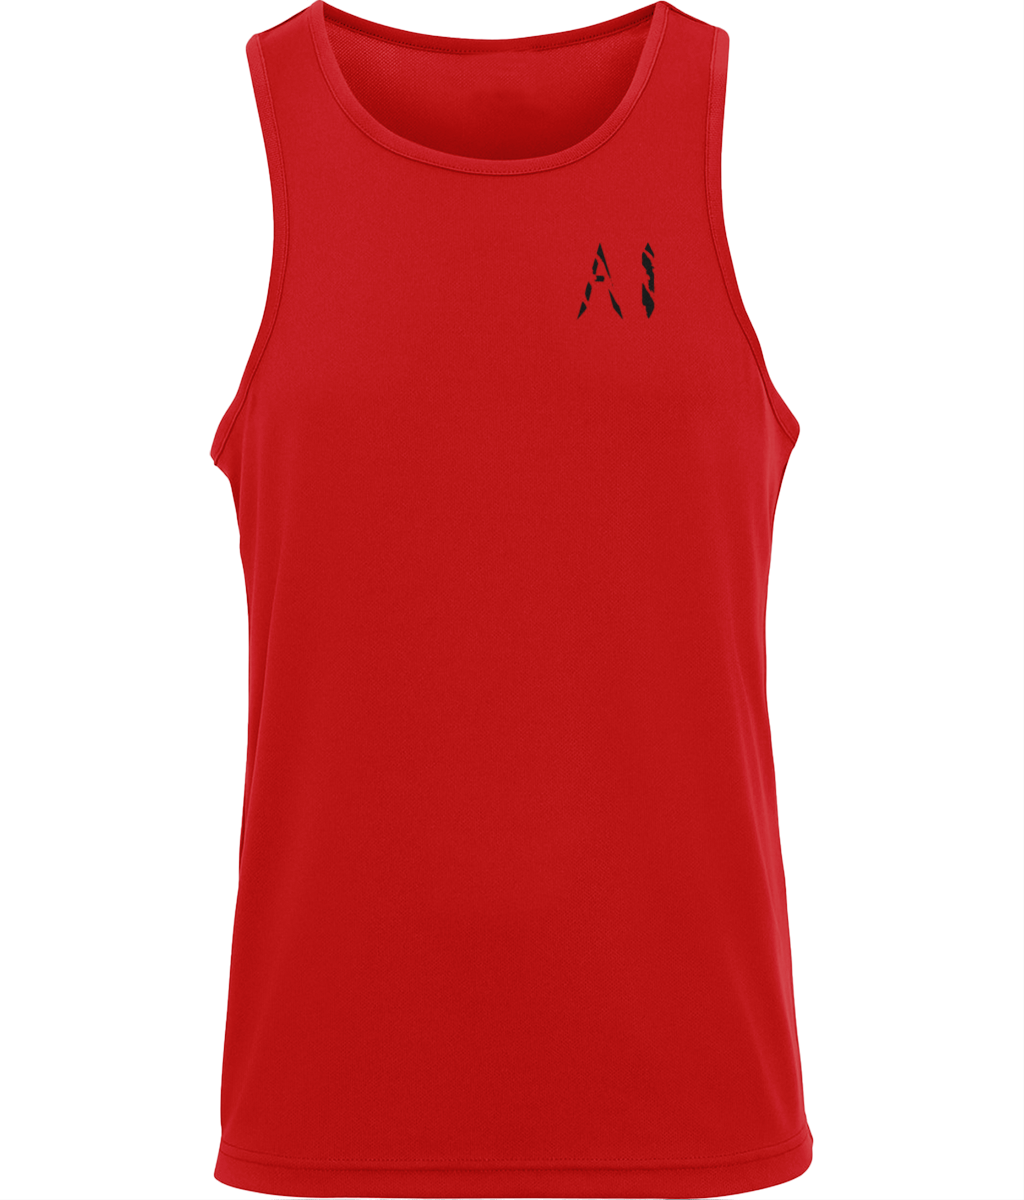 Mens Red Workout Sports Vest with black AI logo written on the left chest